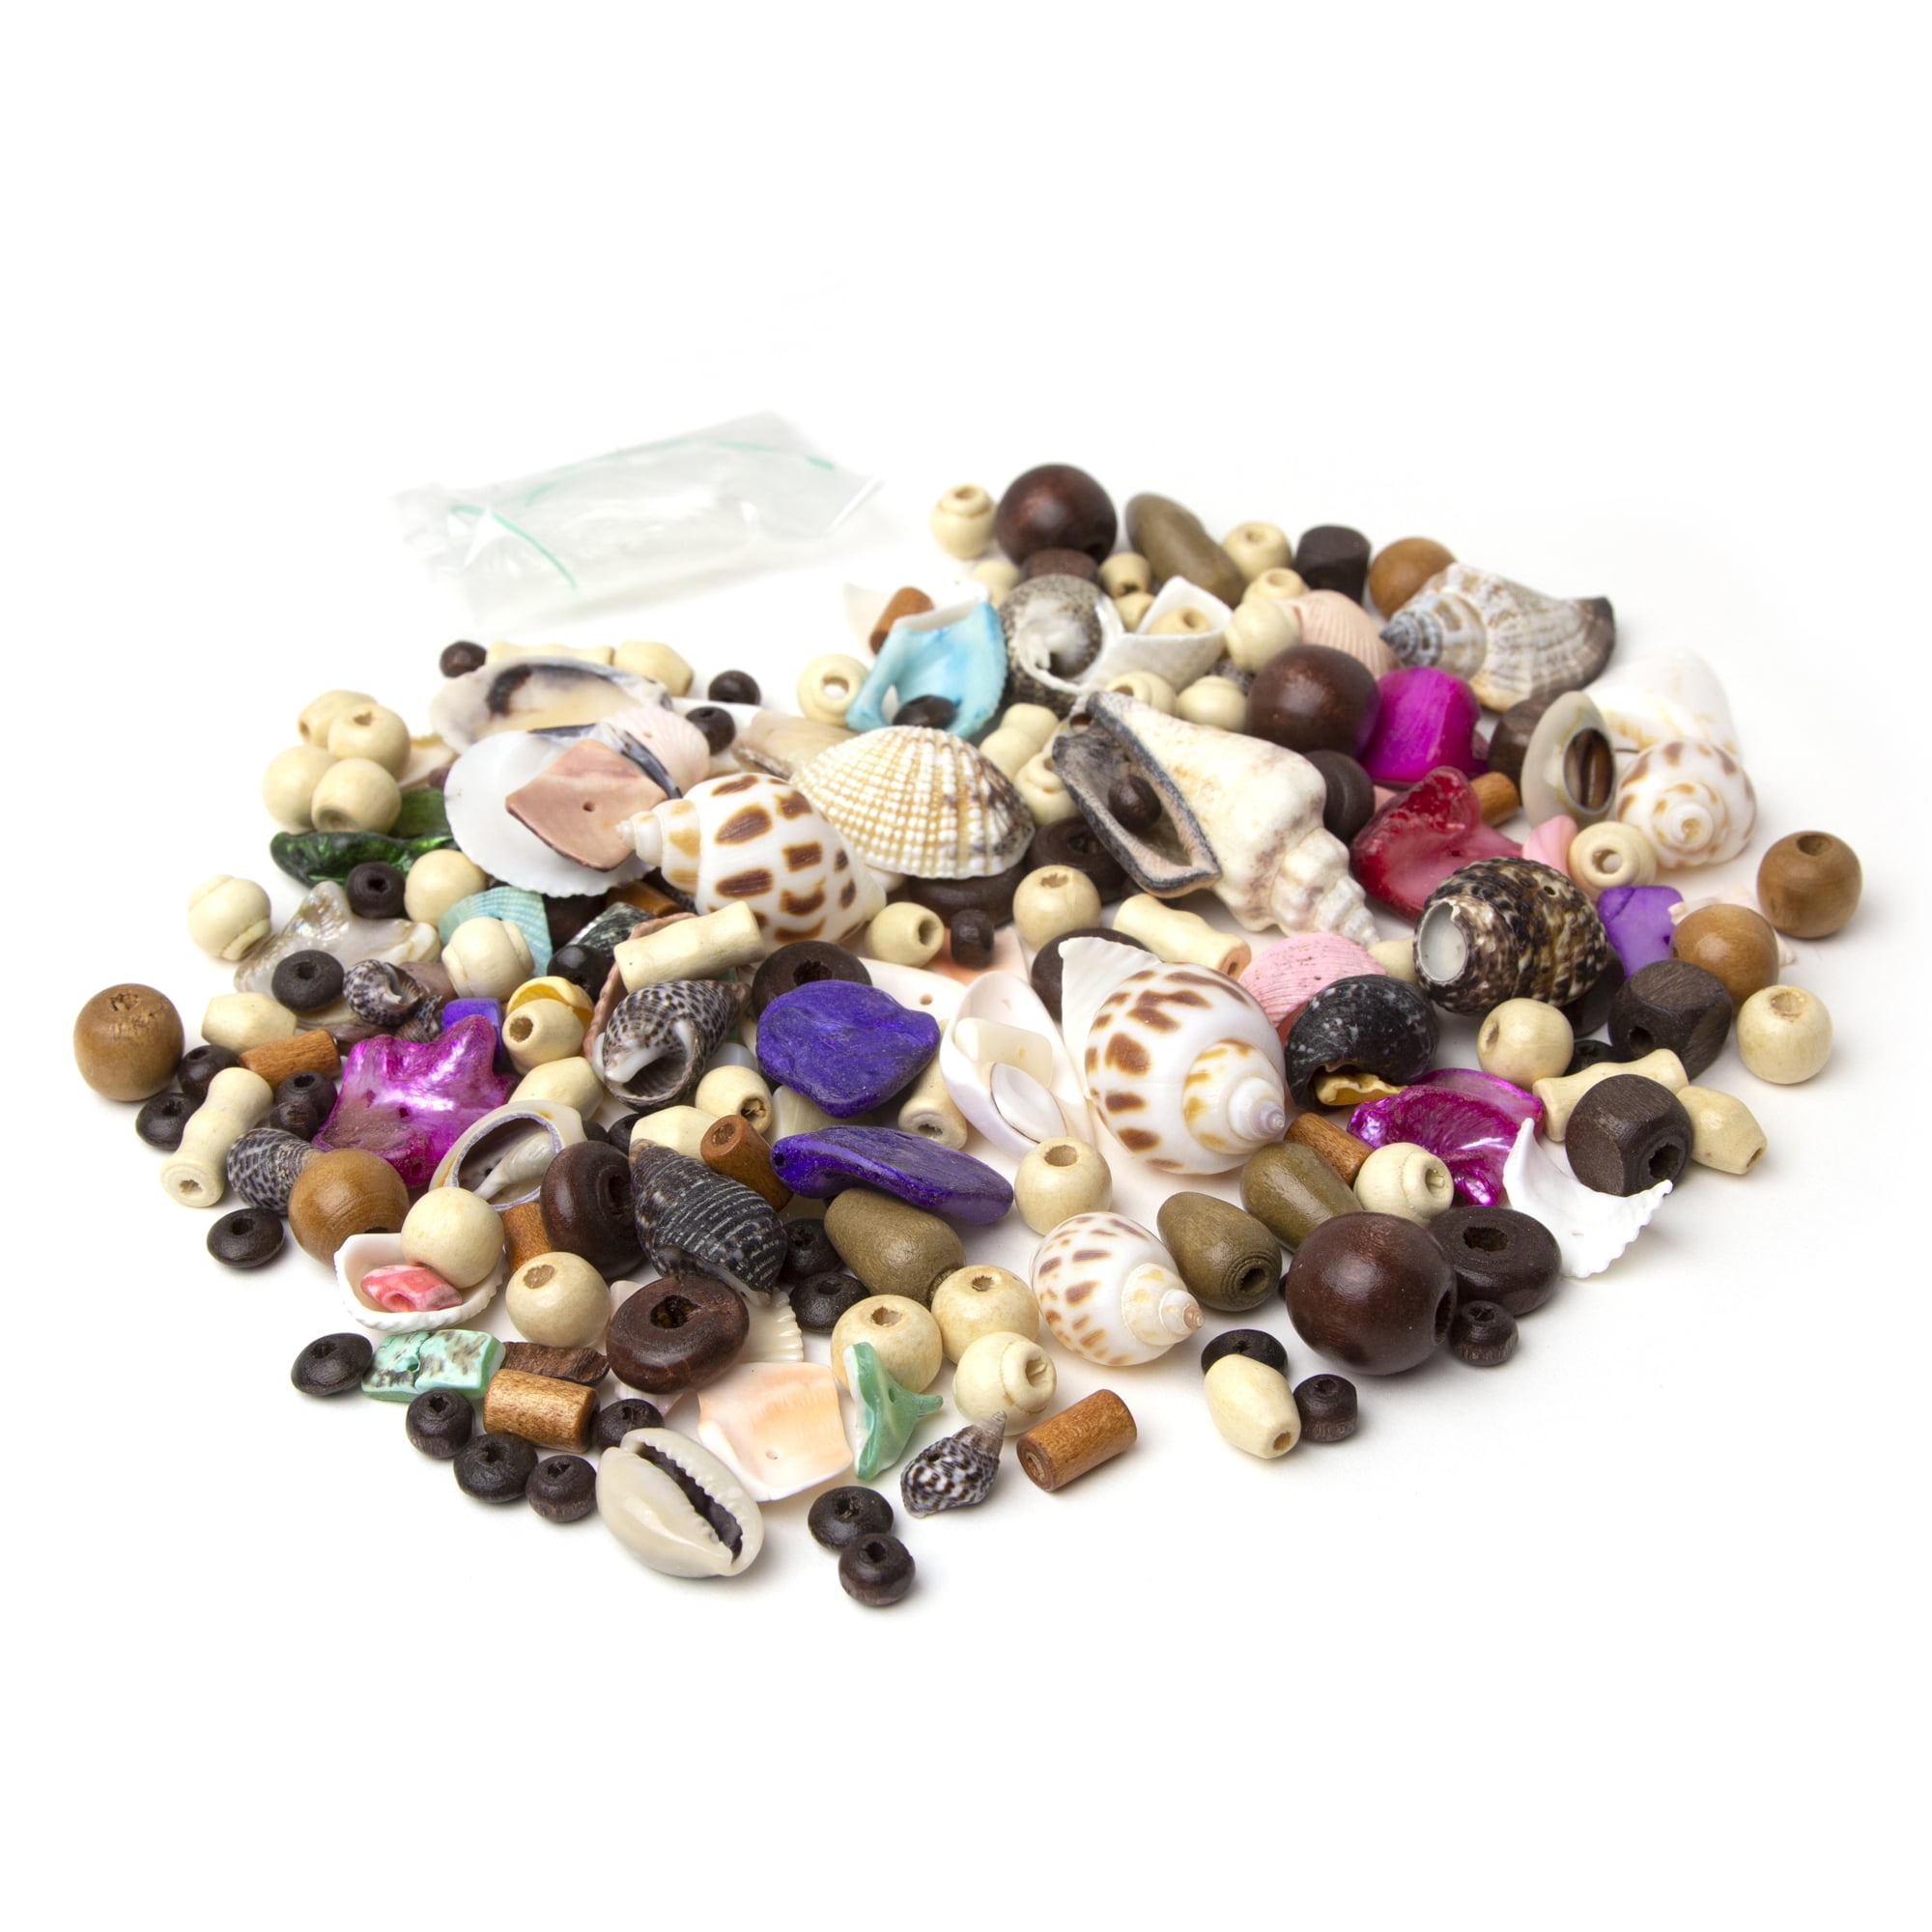 Cousin DIY, Glass Bead Mix with Metal Spacer Beads, Unisex, Model#  AJM64100021, 1200+ Pieces 